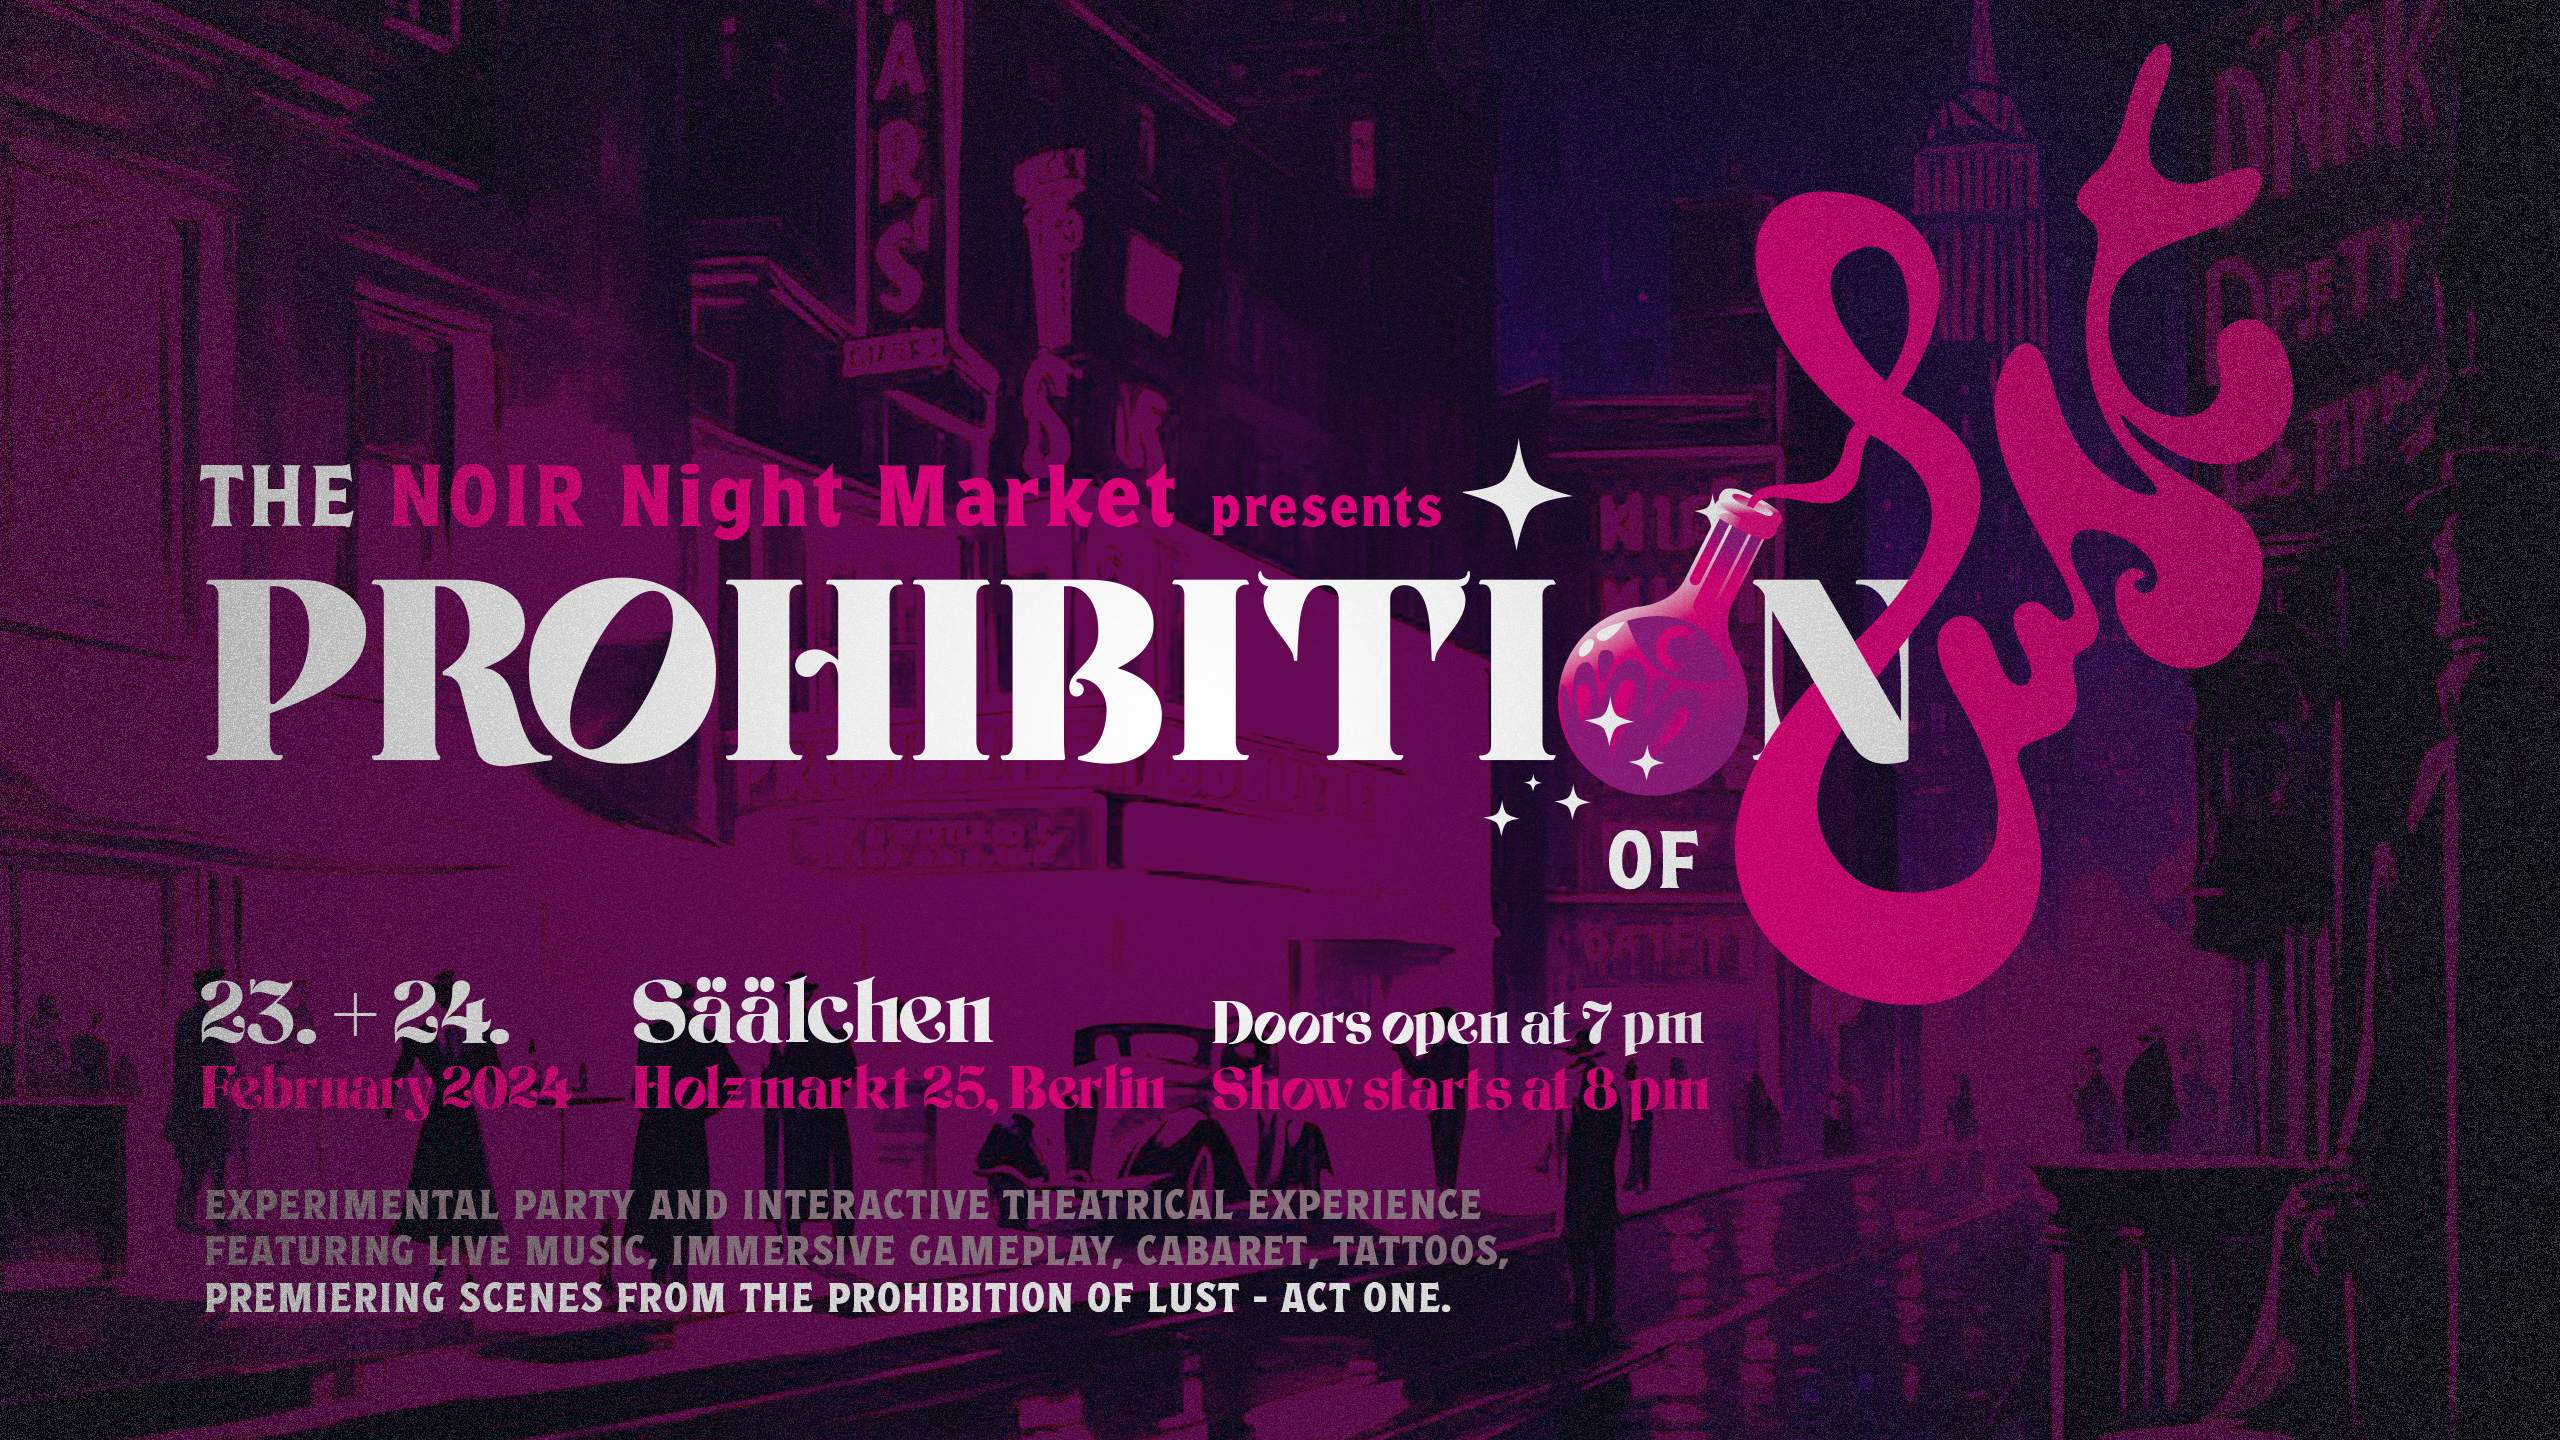 NOIR Night Market presents: The Prohibition of Lust [DAY 2] - Página frontal